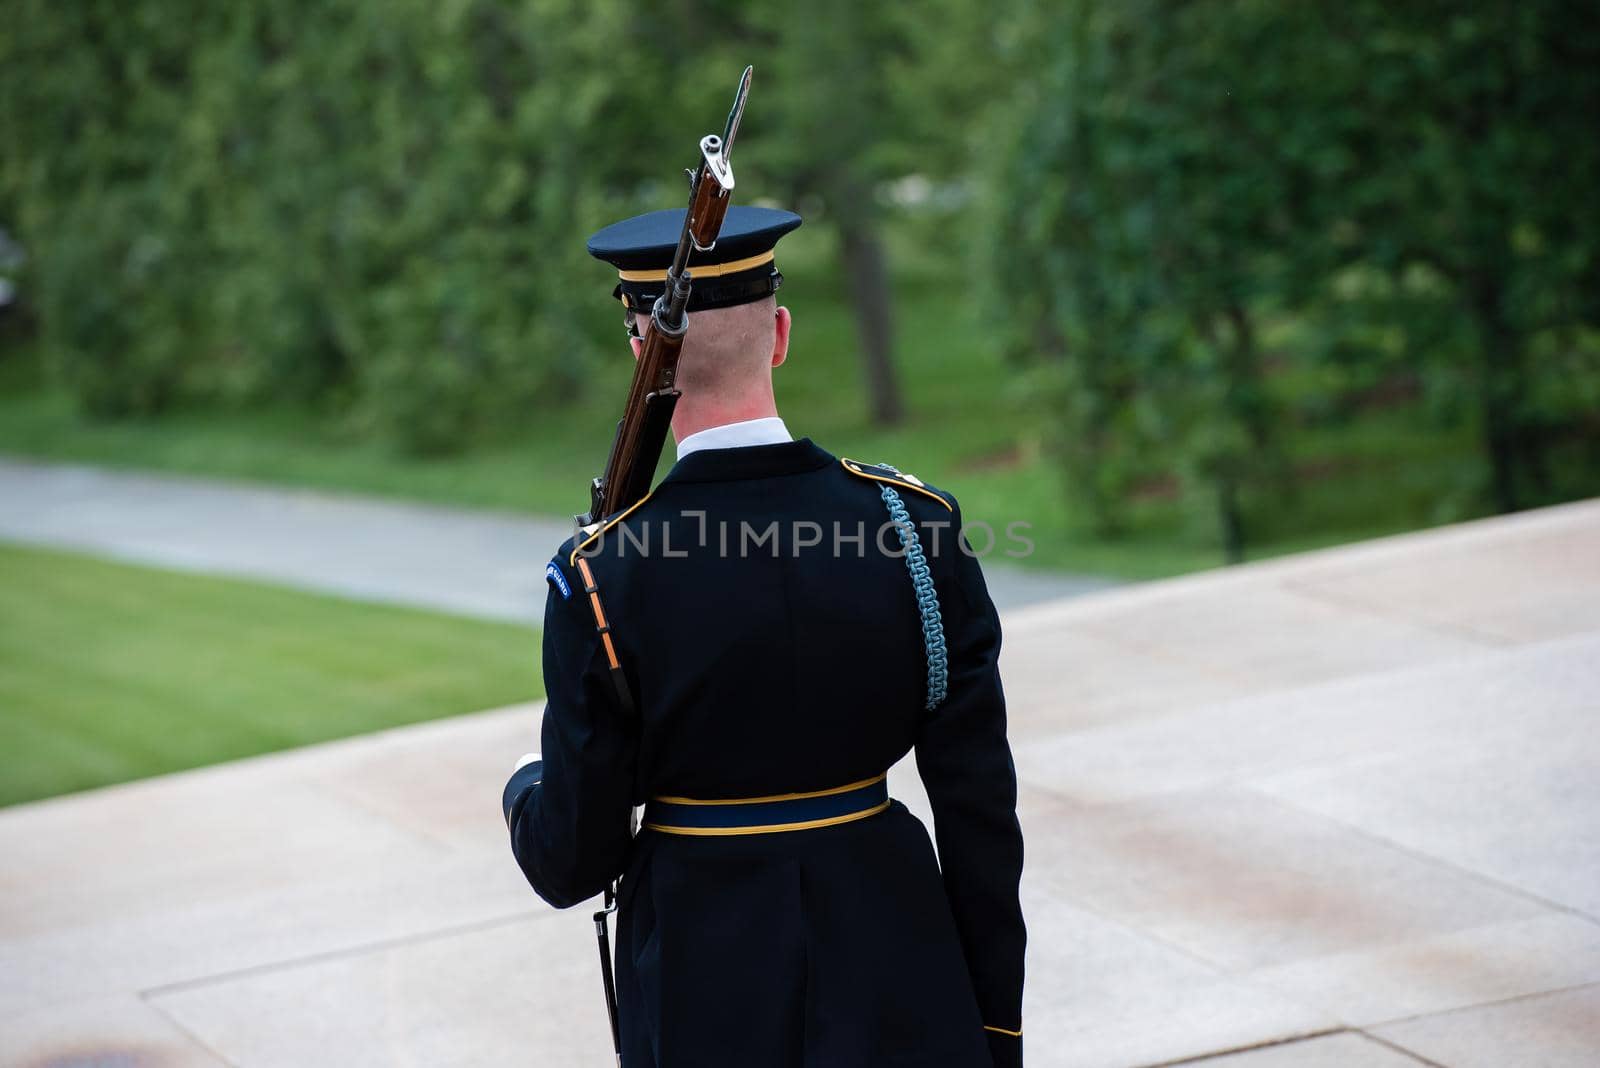 Ceremony at the Tomb of the Unknown soldier in Arlington, VA by jyurinko